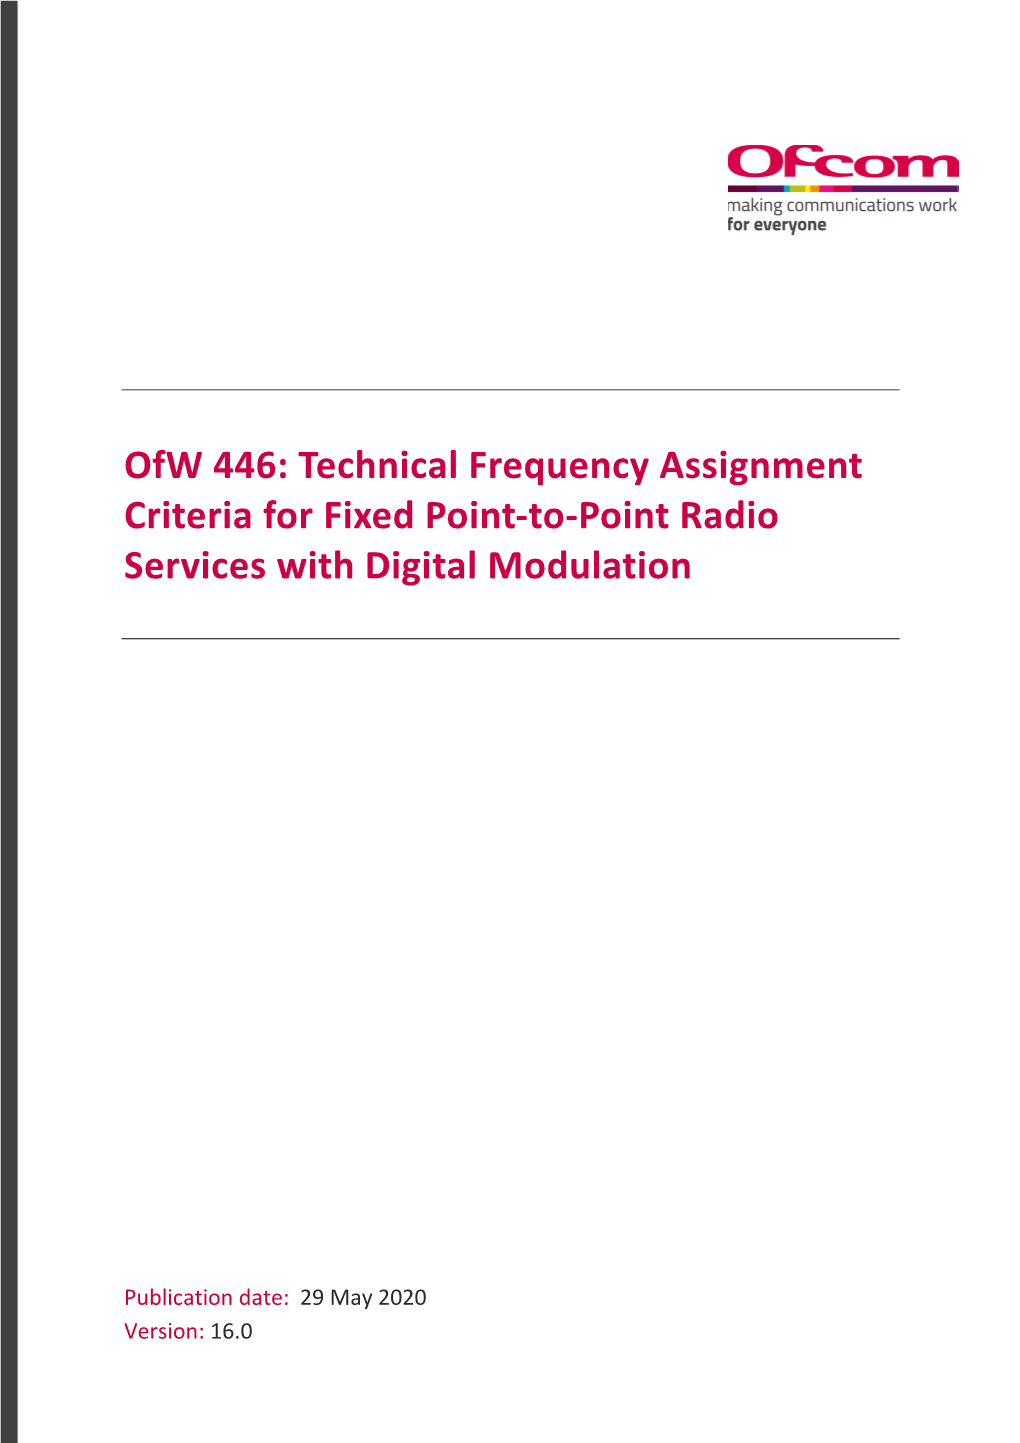 Ofw 446: Technical Frequency Assignment Criteria for Fixed Point-To-Point Radio Services with Digital Modulation